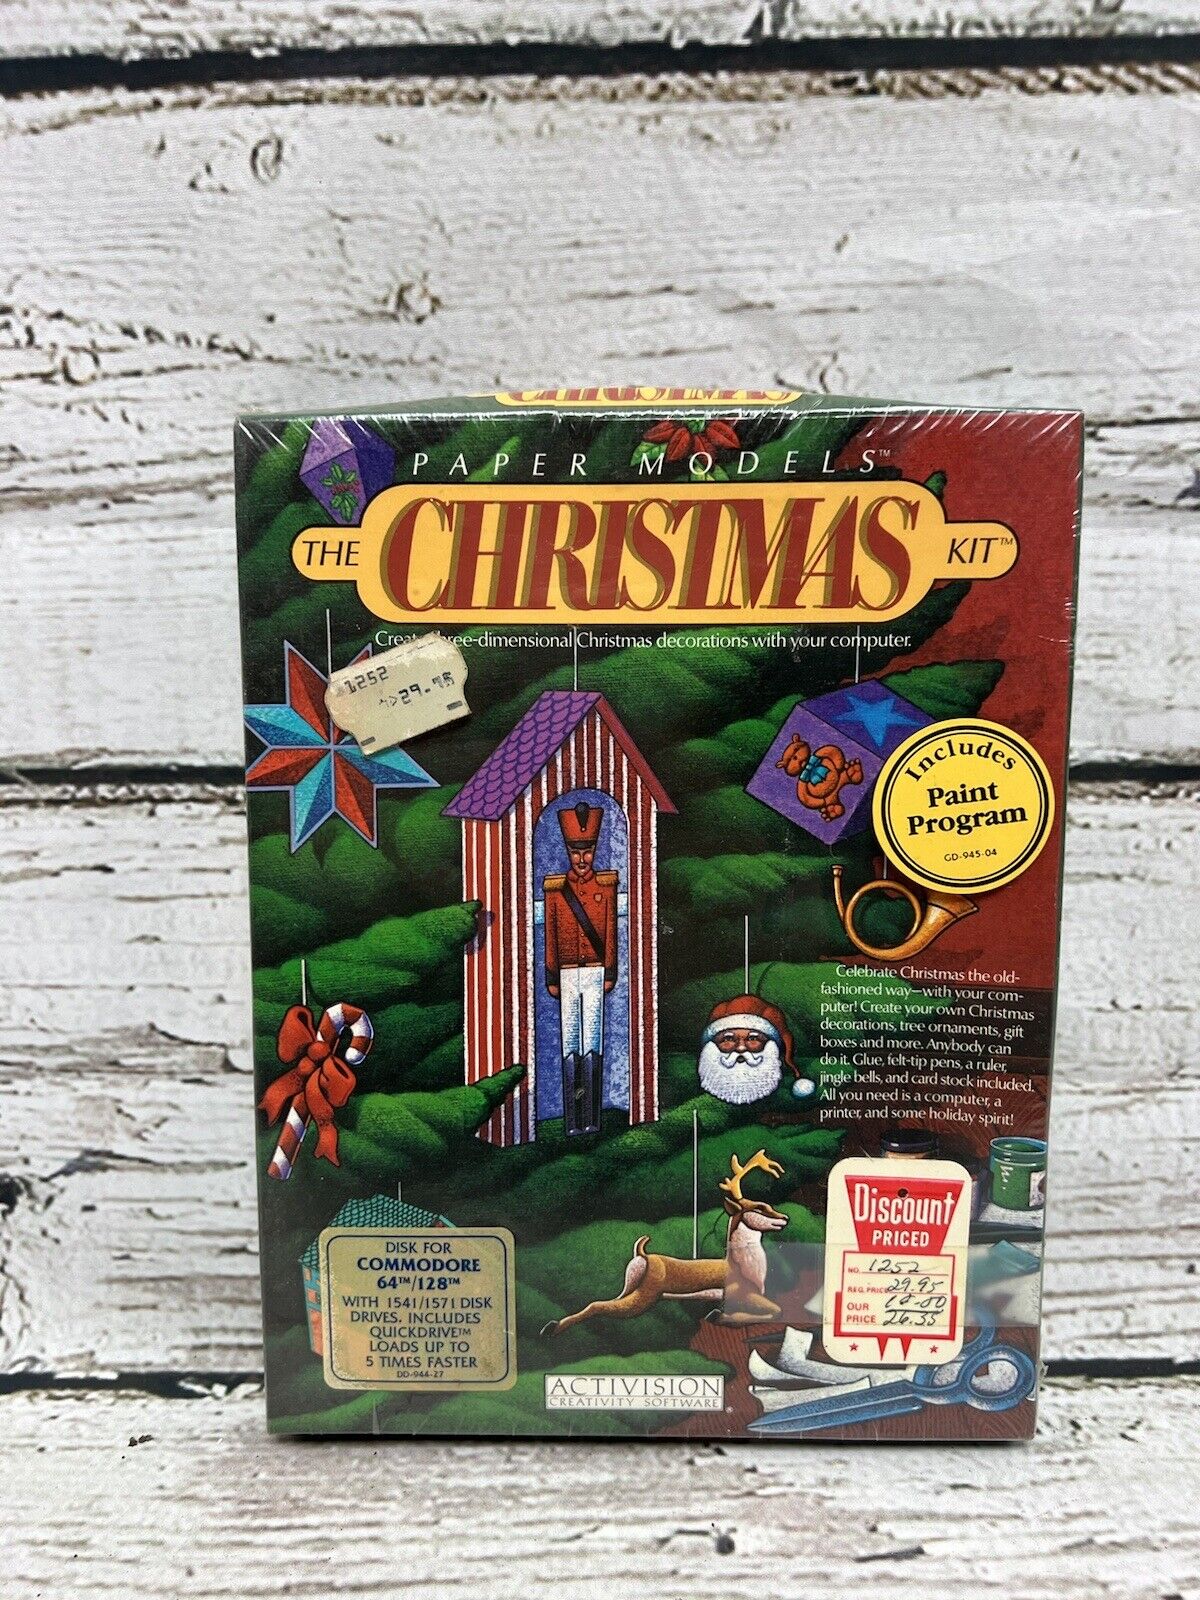 Paper Models The Christmas Kit Commodore 64/128 VTG 1986 Activision - New Sealed